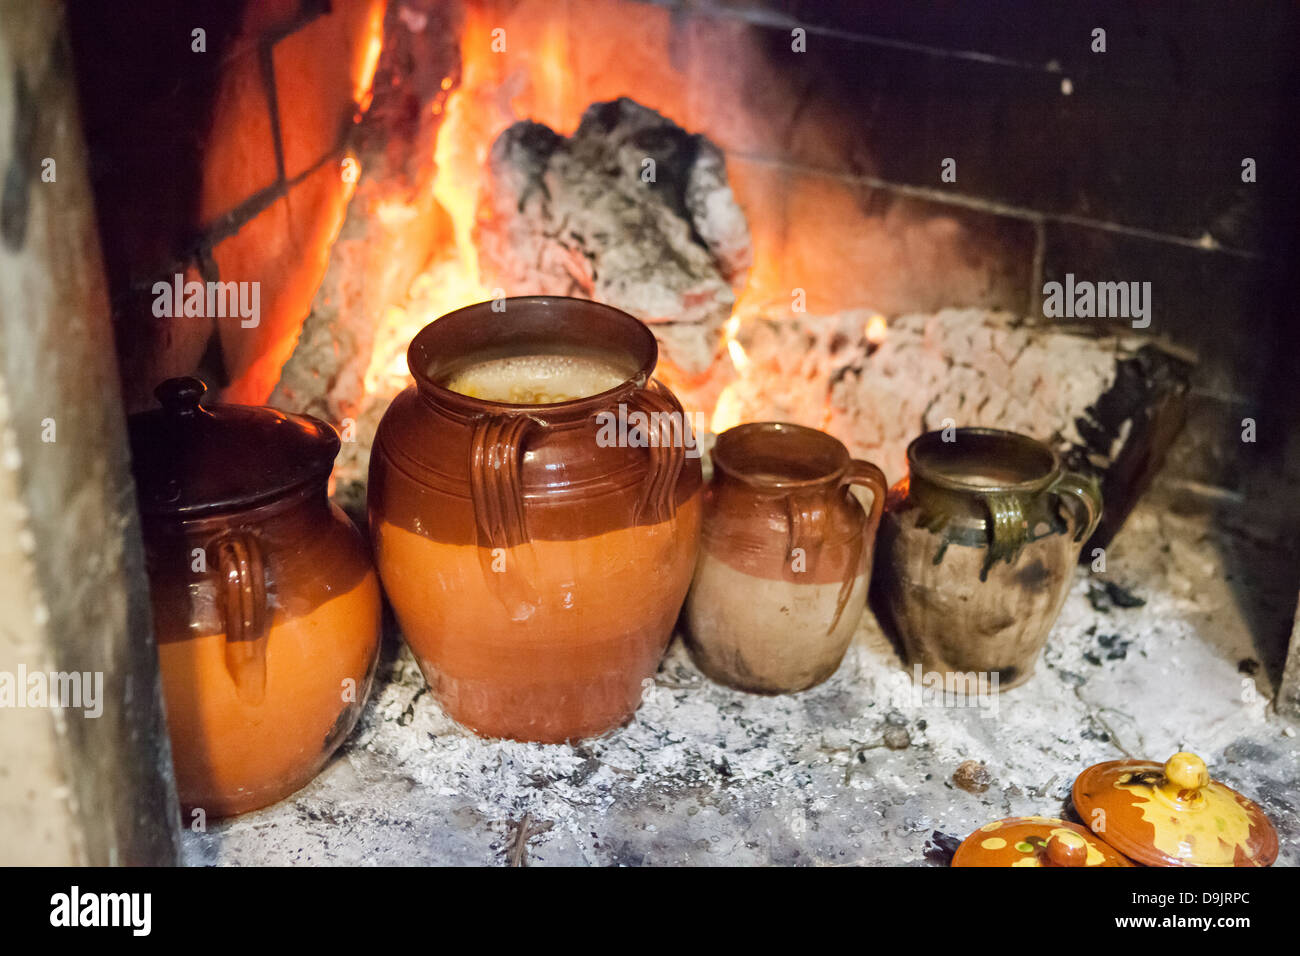 Chickpeas and other pulses in terracotta jars, cooking by an open fire. Stock Photo